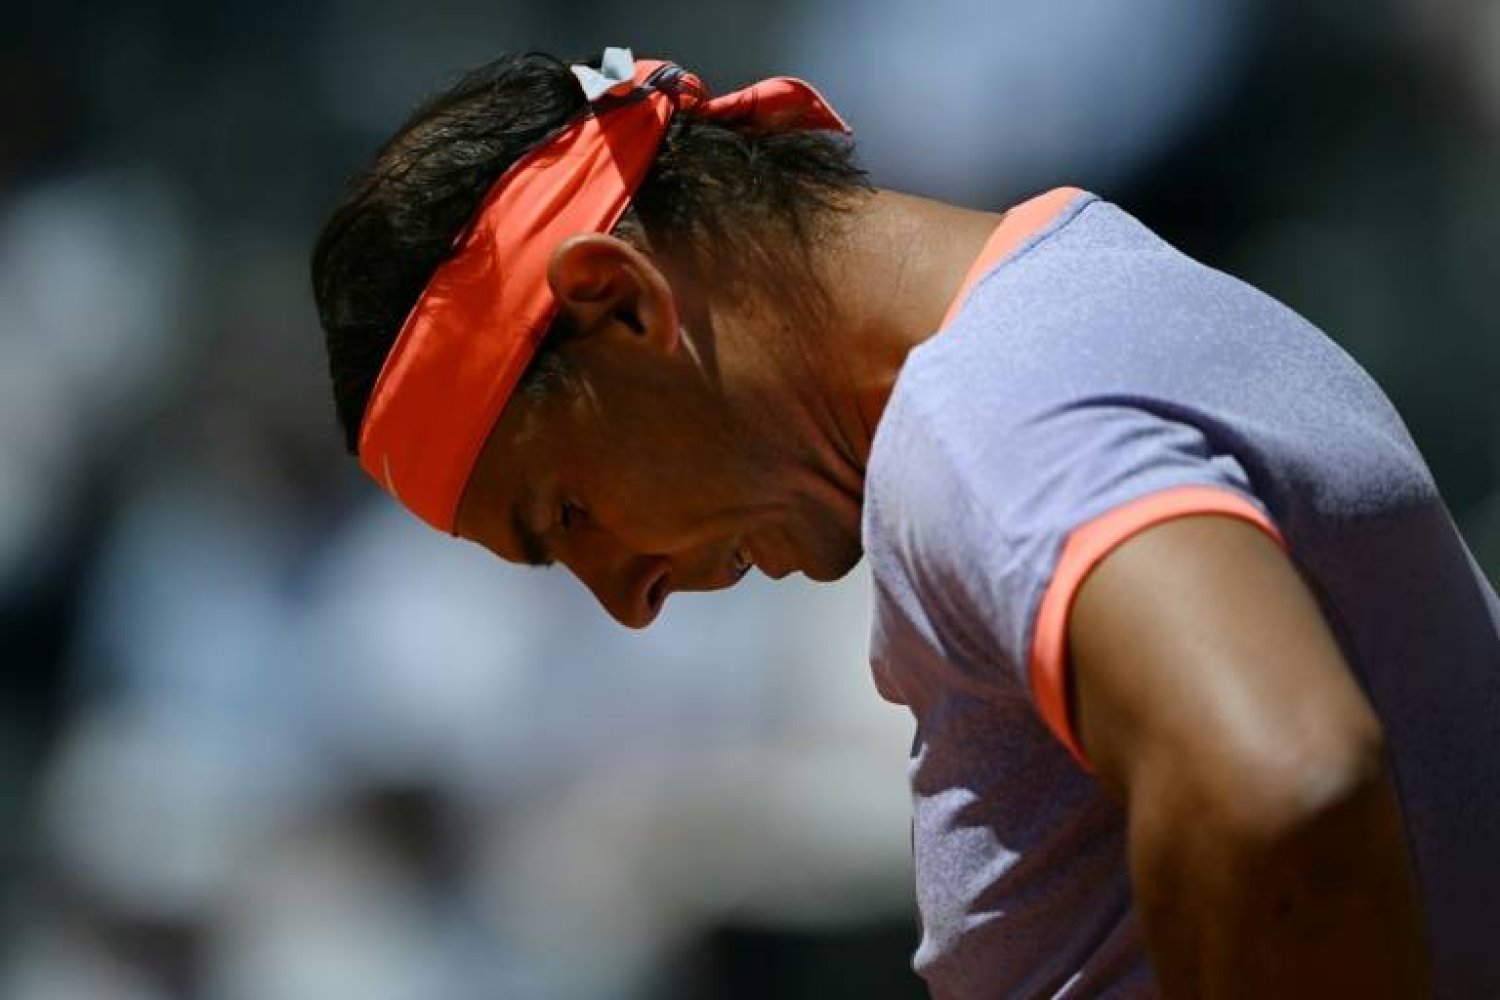  Spain's Rafael Nadal fell to a second-round defeat in Rome ahead of the French Open - AFP
